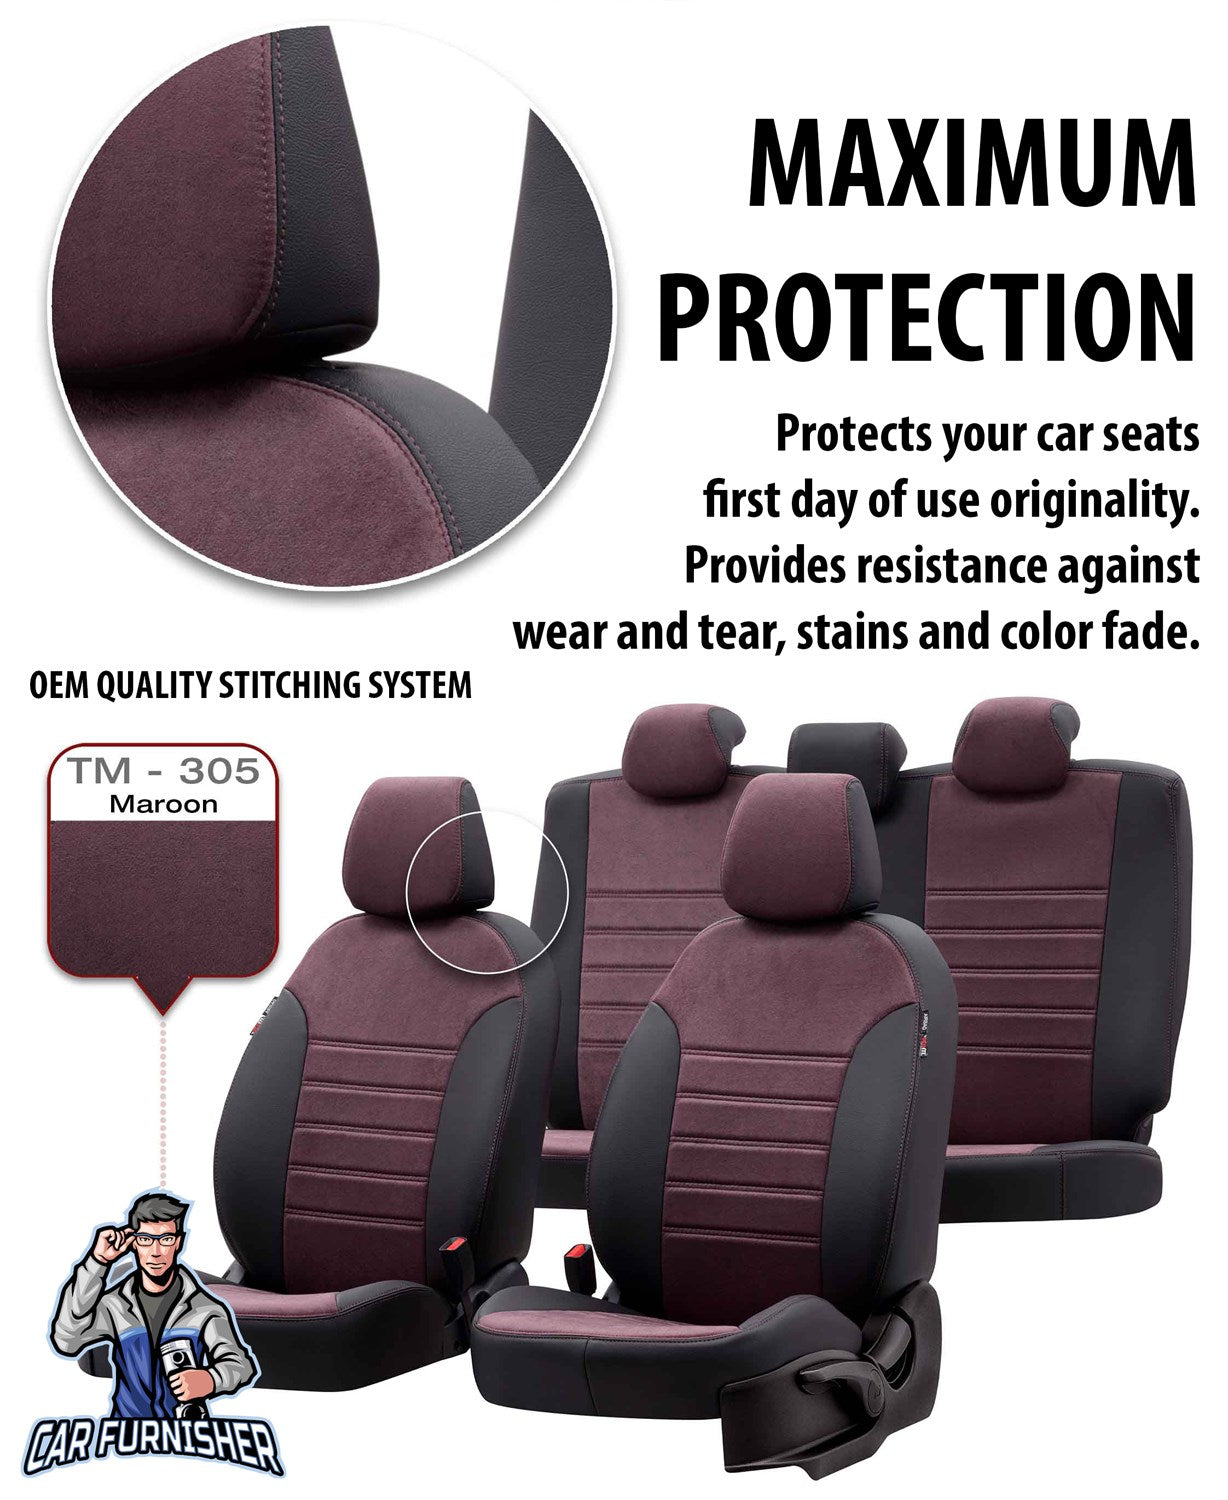 Peugeot J9 Seat Cover Milano Suede Design Burgundy Front Seats (2+1 Seats + Handrest + Headrests) Leather & Suede Fabric